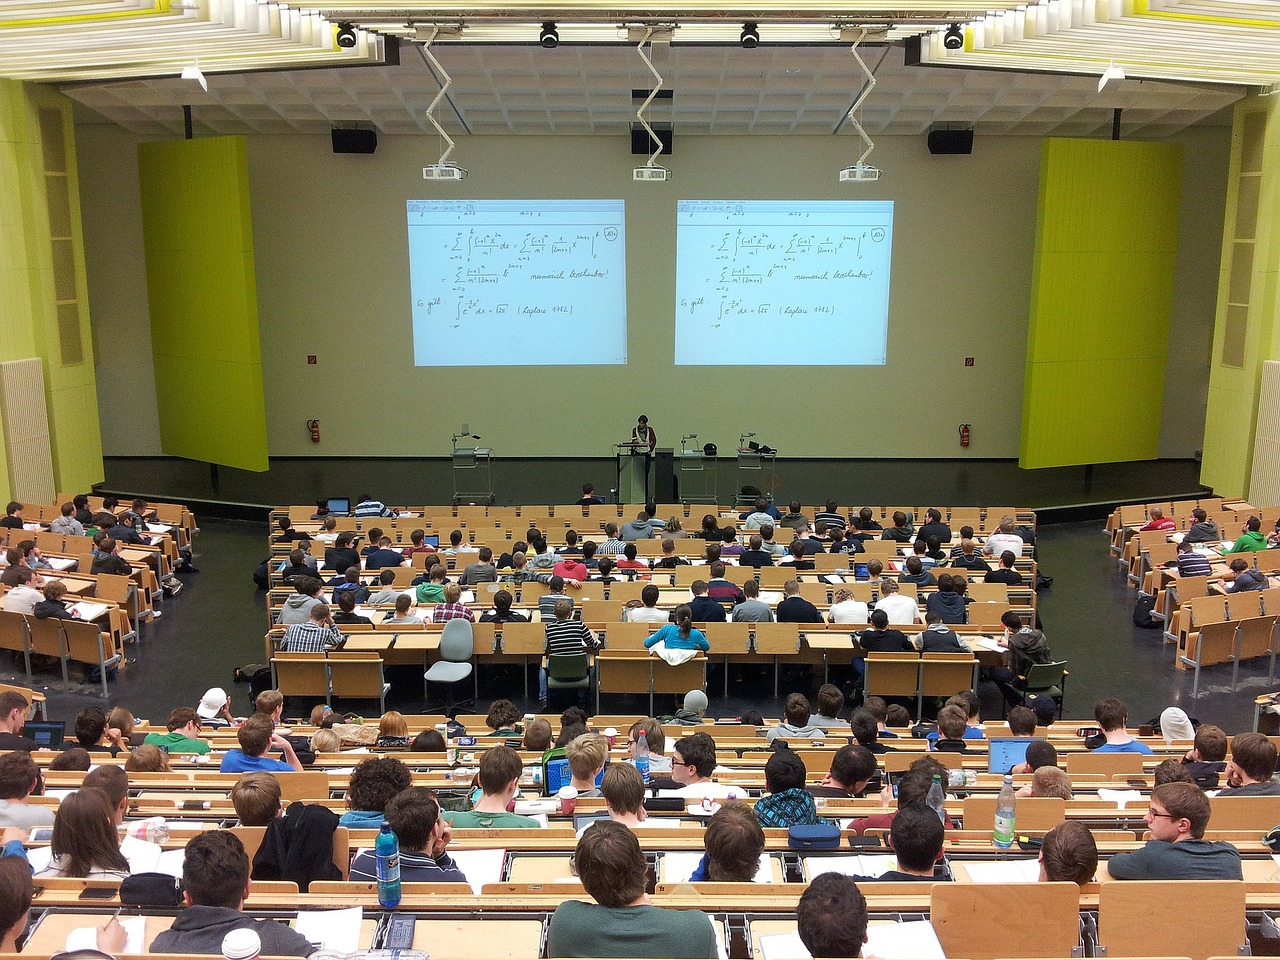 College life-lecture hall